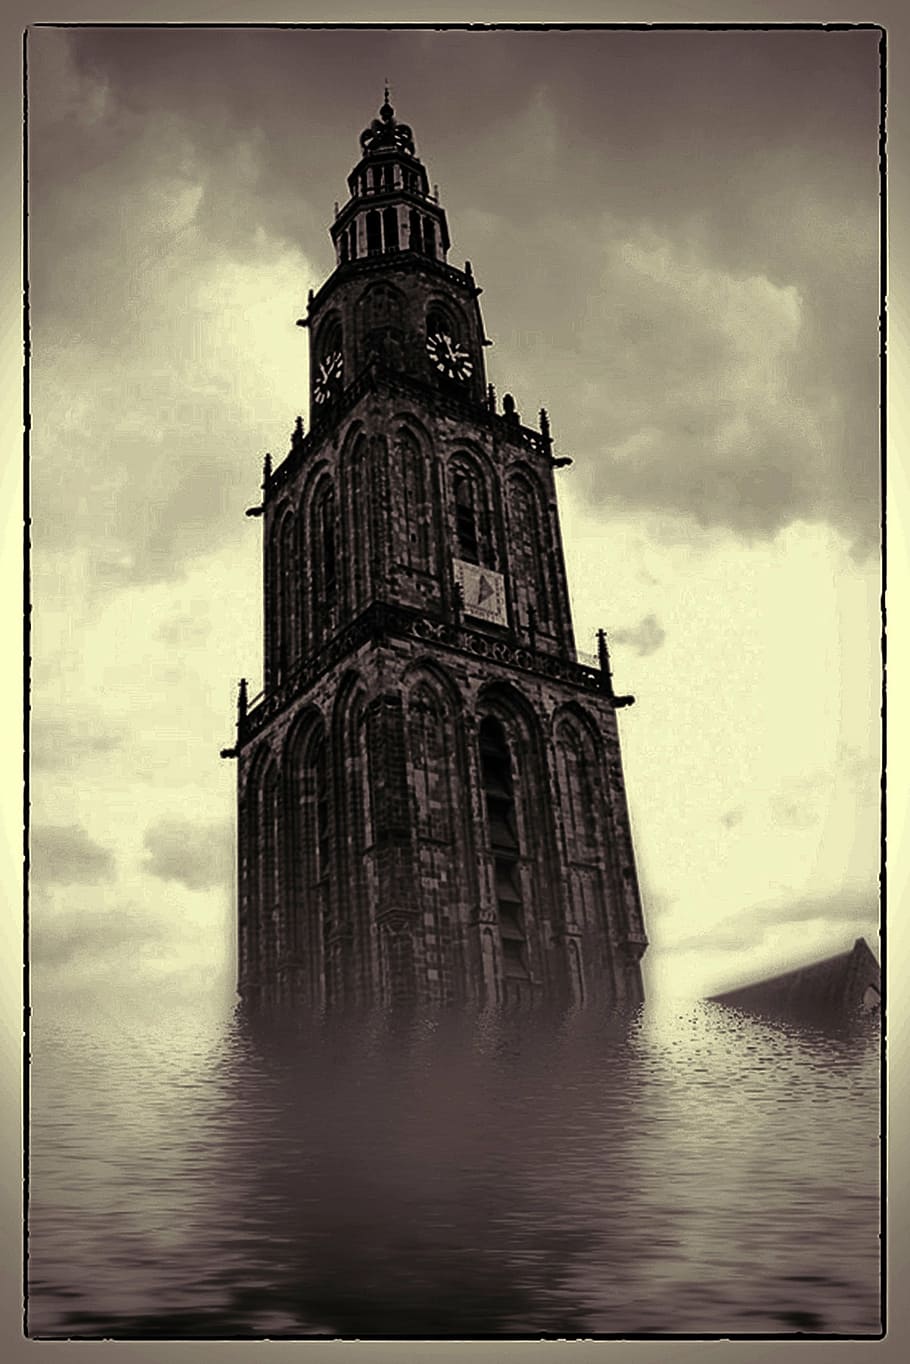 tower clock, water, digital art, framed flooded, church, tower, underwater, weather, mood, surreal